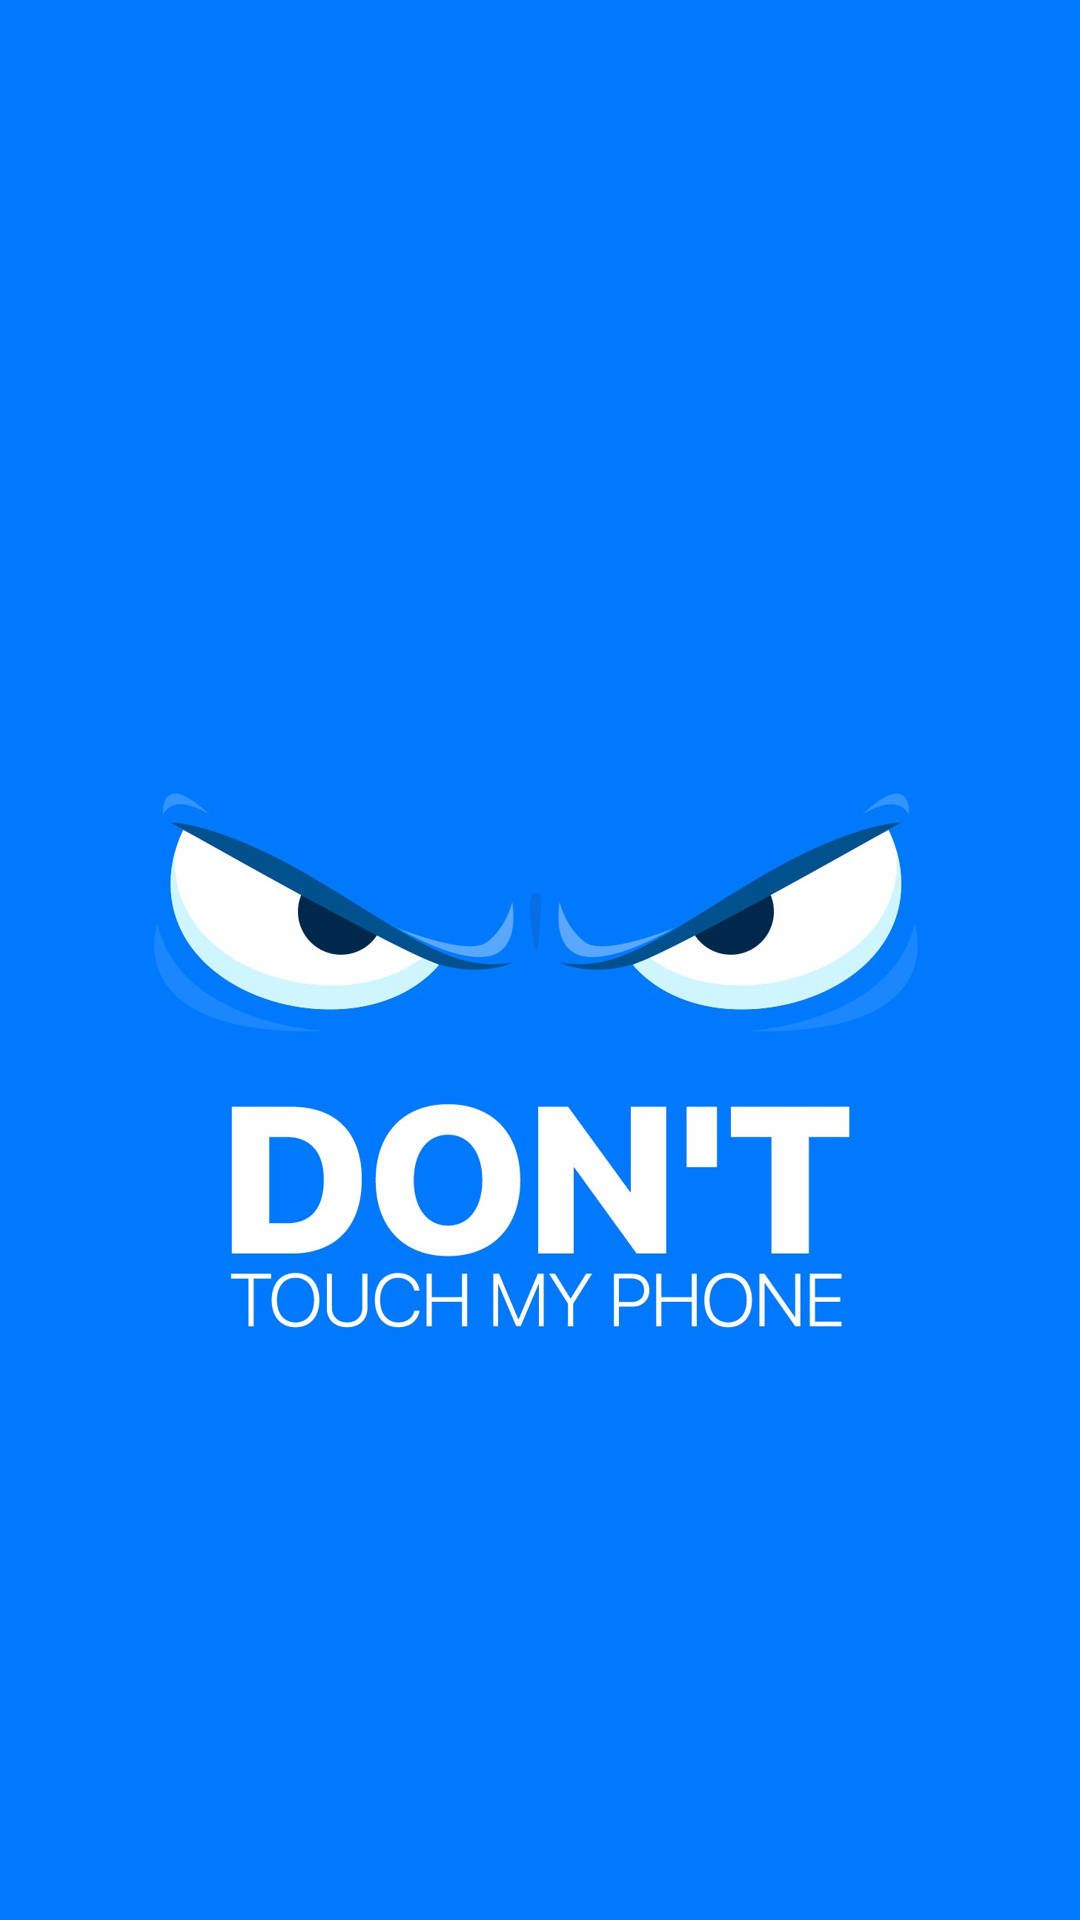 Free Dont Touch My Phone Wallpaper Downloads, Dont Touch My Phone Wallpaper for FREE